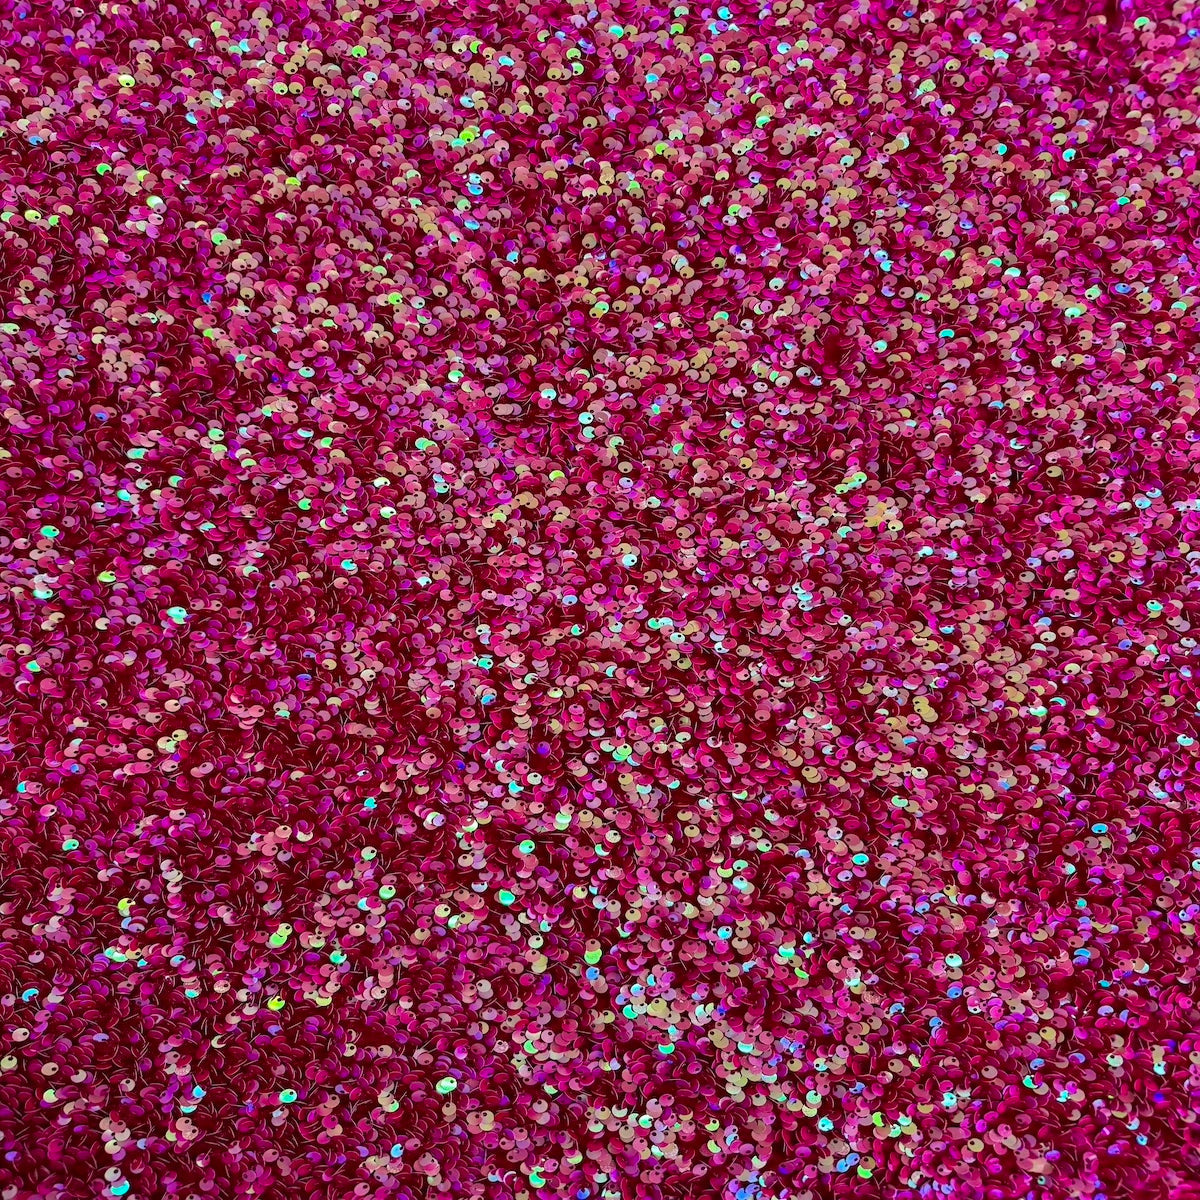 Fuchsia Iridescent Sequins Embroidered Stretch Velvet Rodeo Fabric